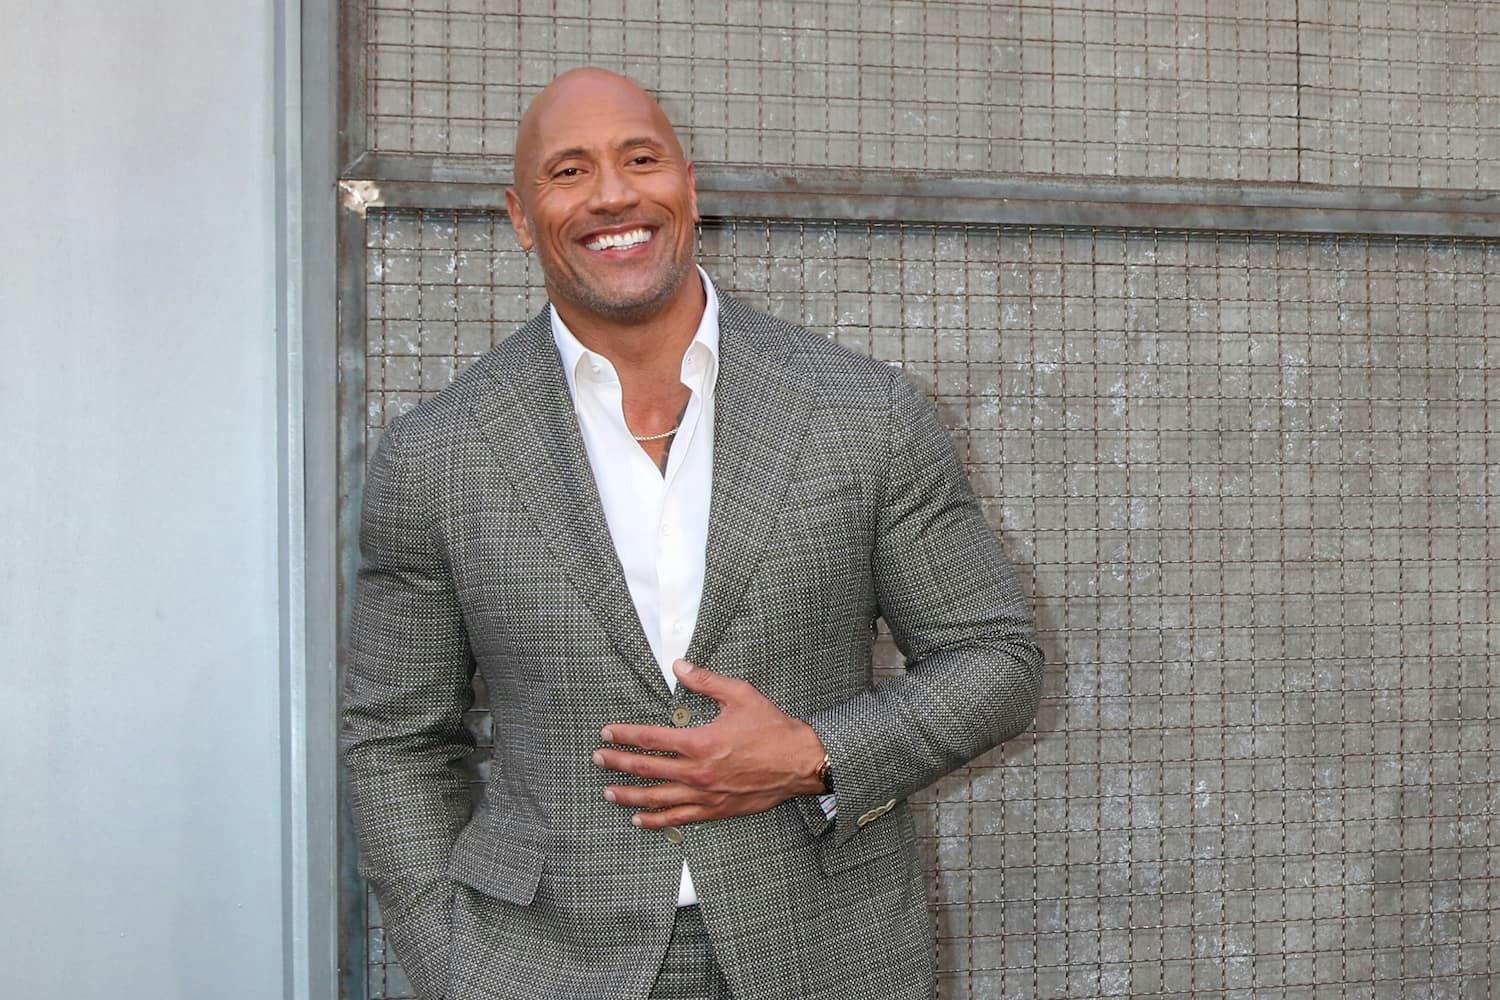 The Rock ‘Moved’ by Support, Following Mental Health Struggles